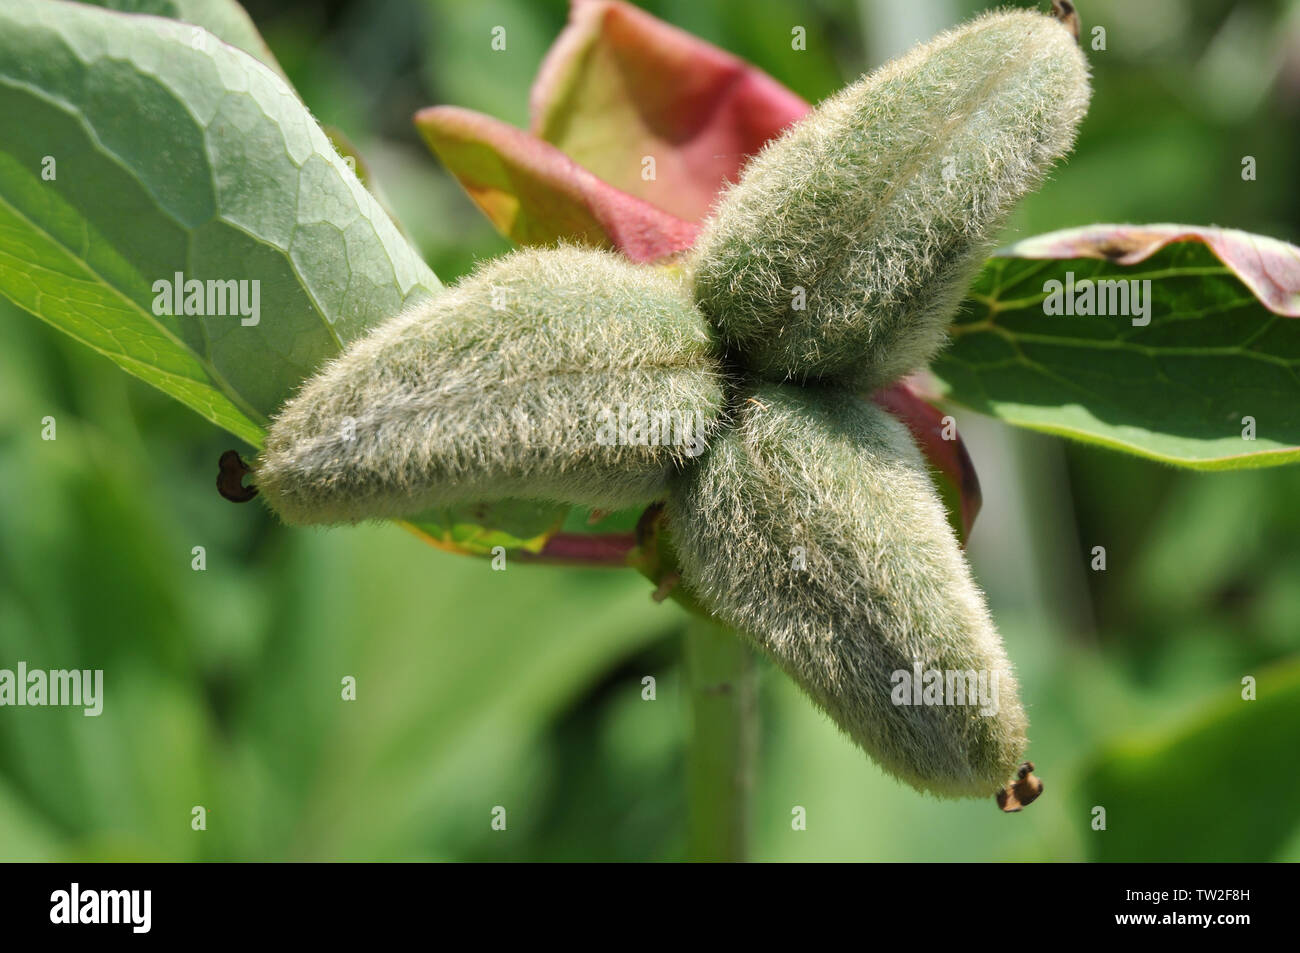 Peony Seed Pods with Popping Black Seeds Stock Photo - Image of garden,  botany: 231483466